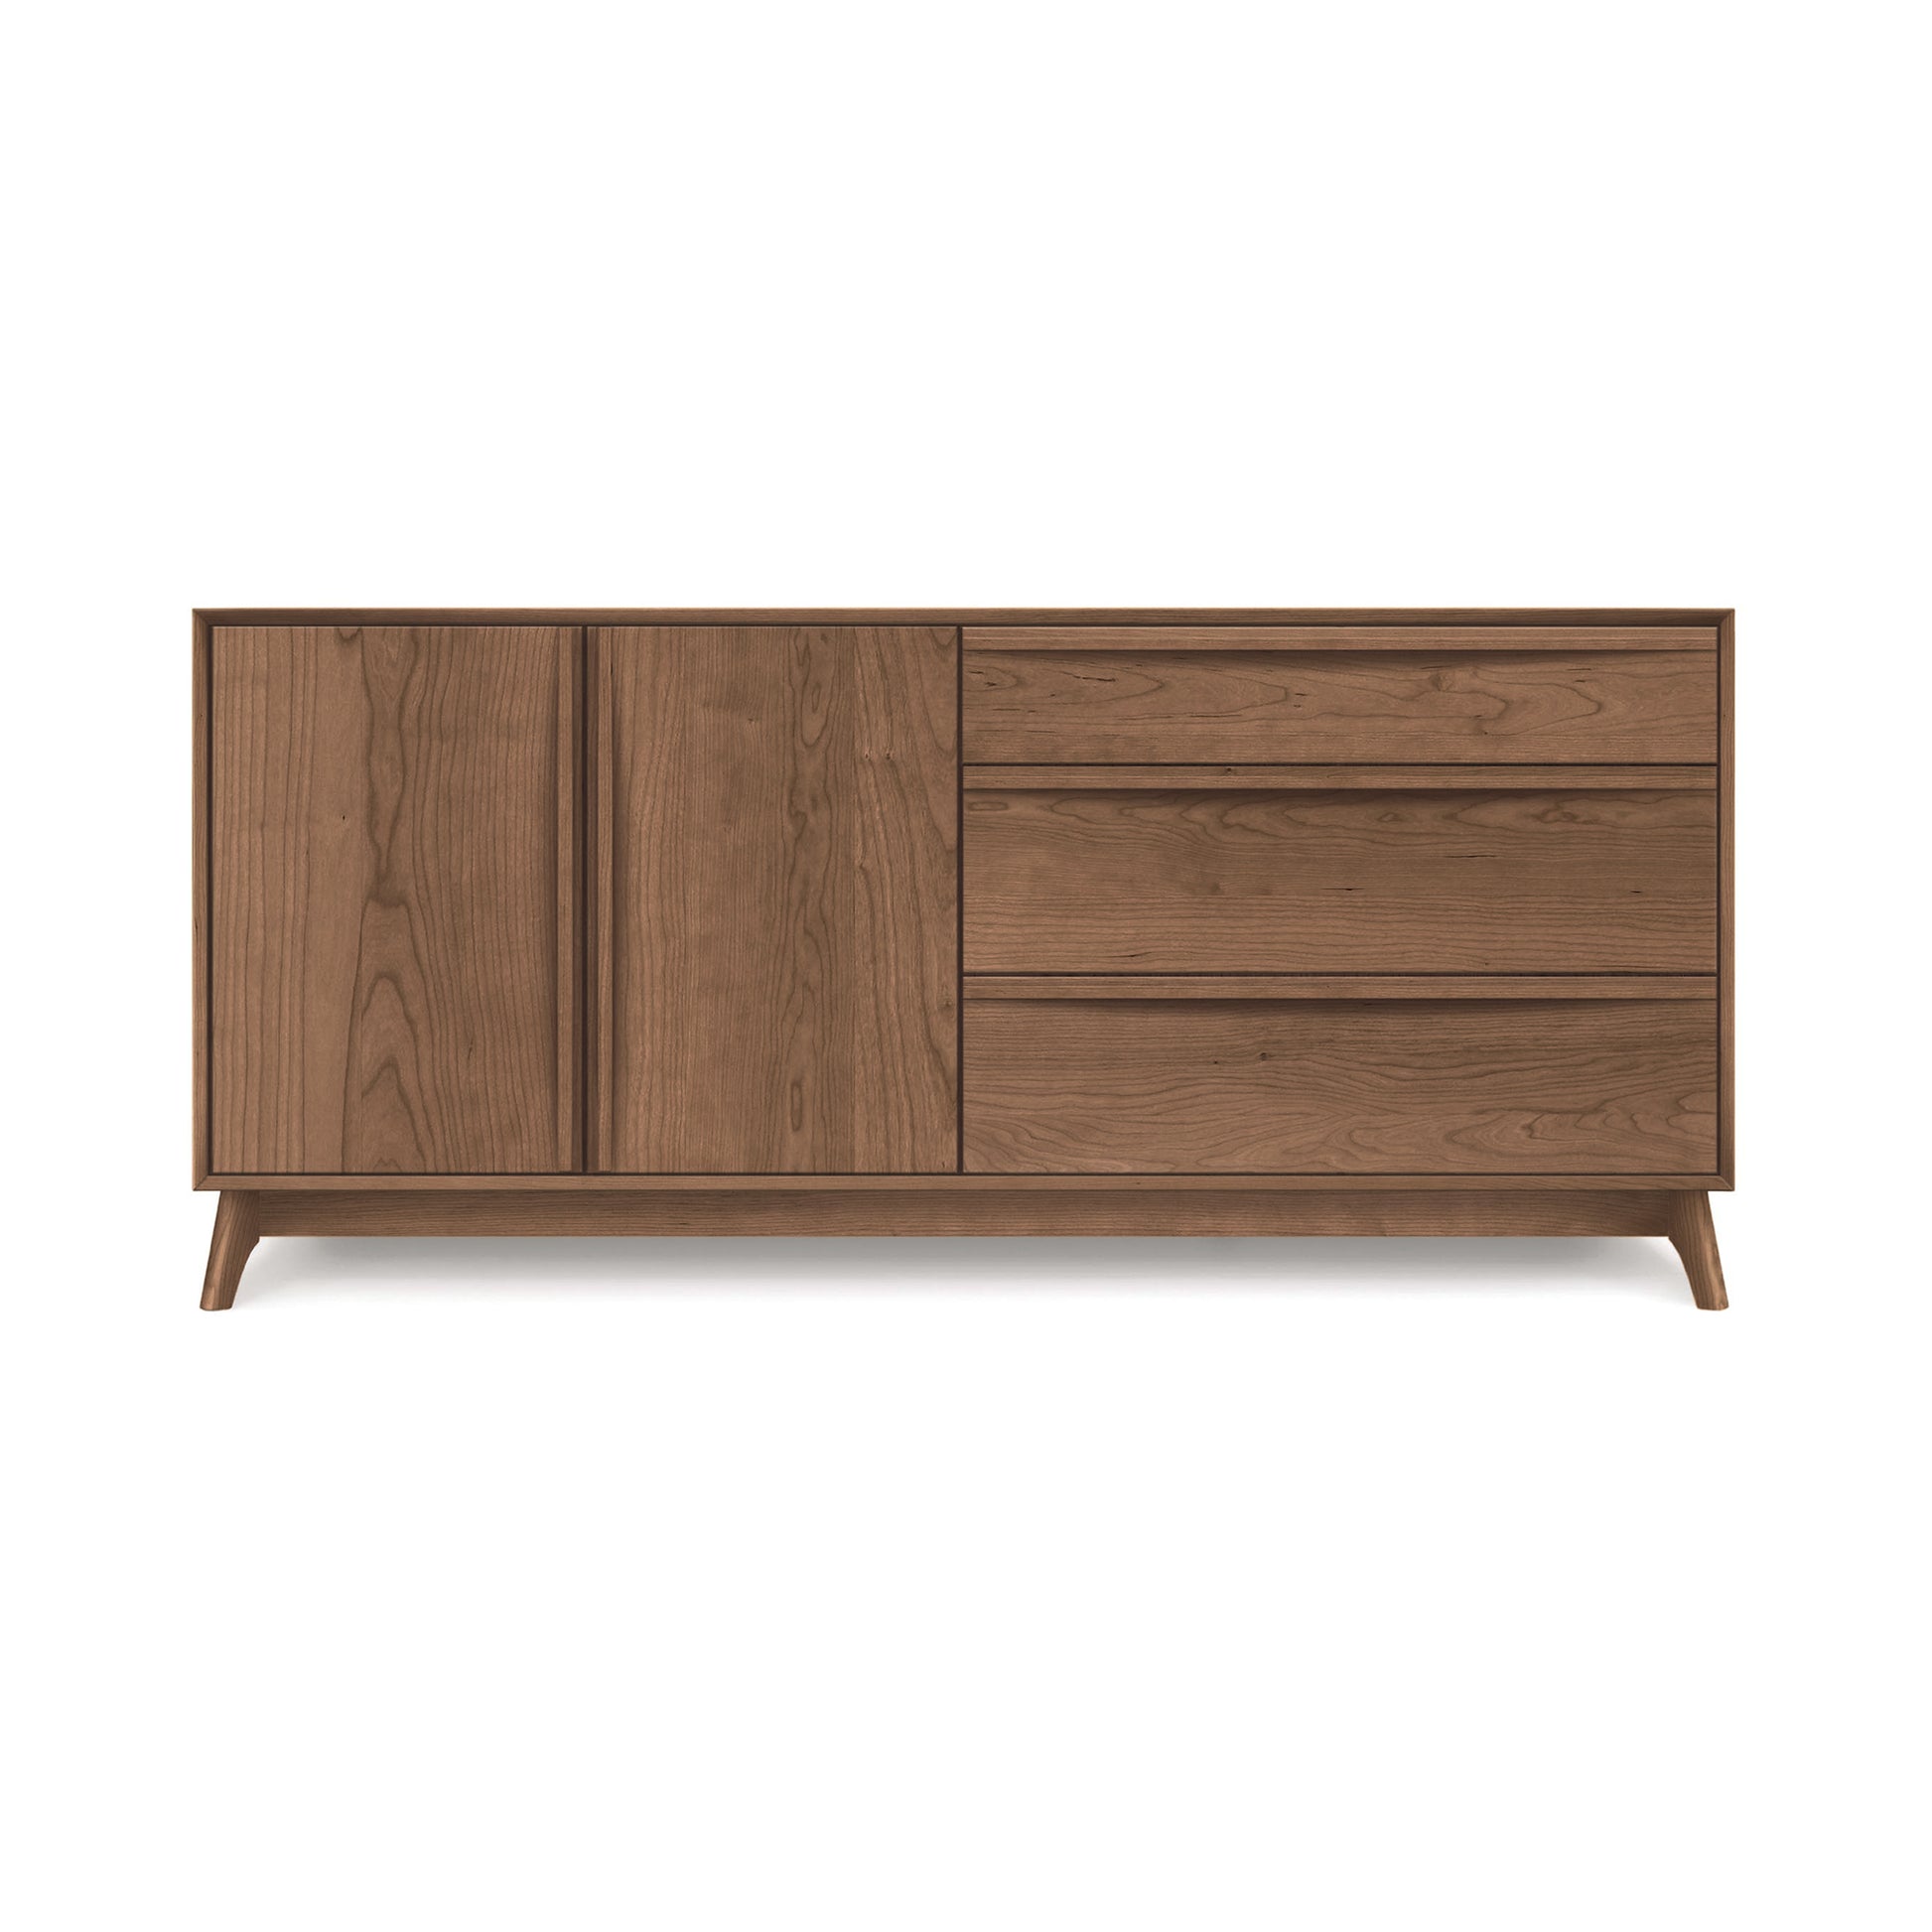 Modern Catalina 3-Drawers, 2-Door Buffet by Copeland Furniture with closed drawers and doors on angled legs, isolated on a white background.